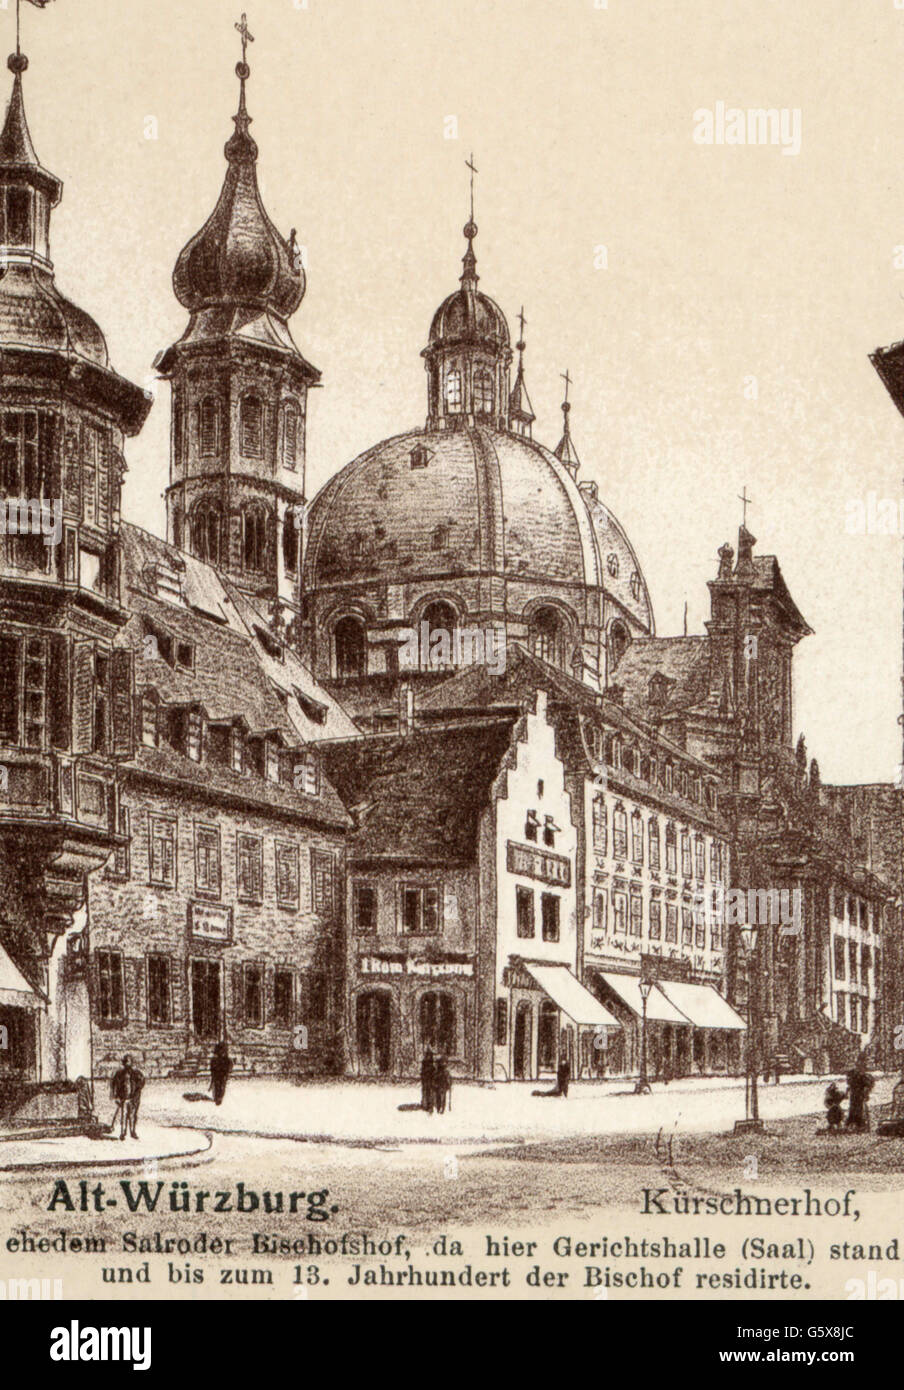 geography / travel, Germany, Wuerzburg, streets, Kuerschnerhof, drawing, postcard, publisher Gustav Erdmann, late 19th century, church, churches, Neumuenster, houses, series Alt-Würzburg, Lower Franconia, Kingdom of Bavaria, German Empire, Imperial Era, Central Europe, people, streets, street, postcard, postal card, postcards, postal cards, publisher, publishers, historic, historical, Wuerzburg, Würzburg, Wurzburg, Kuerschnerhof, Kürschnerhof, Kurschnerhof, Neumuenster, Neumünster, Neumunster, Additional-Rights-Clearences-Not Available Stock Photo